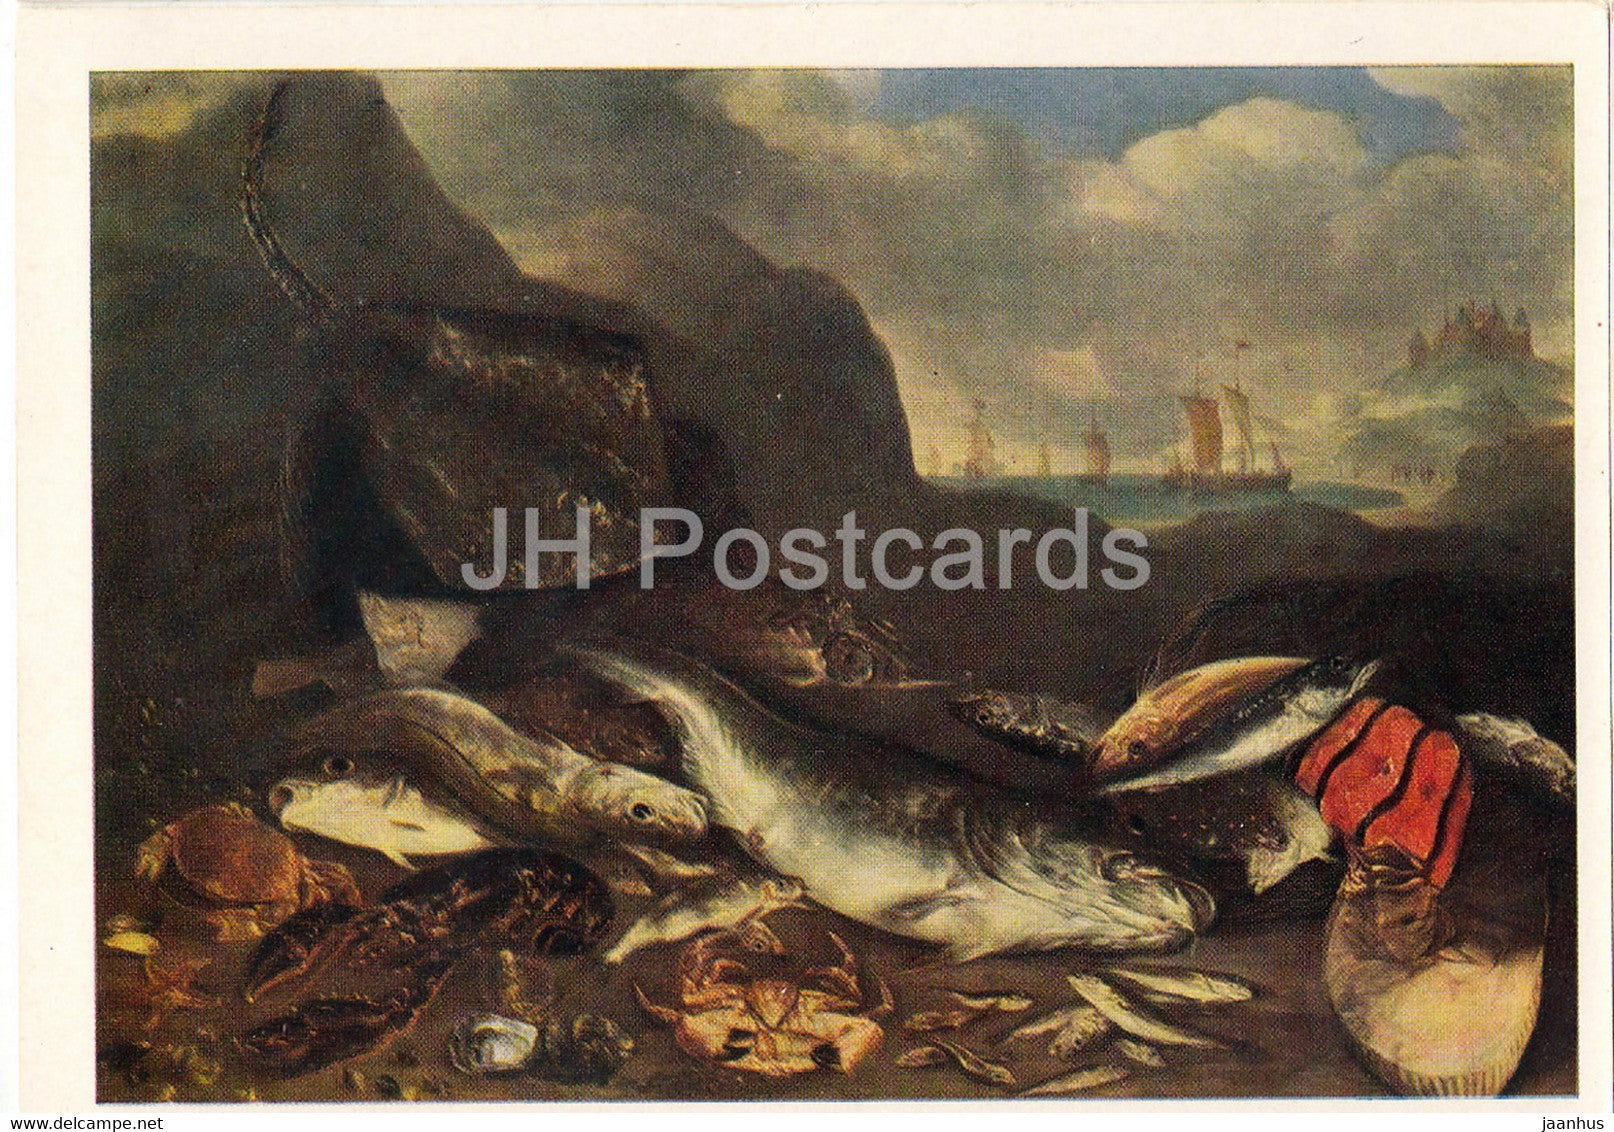 painting by Abraham van Beijeren - Fish by the Sea - Still Life - crab - lobster Dutch art - 1964 - Russia USSR - unused - JH Postcards